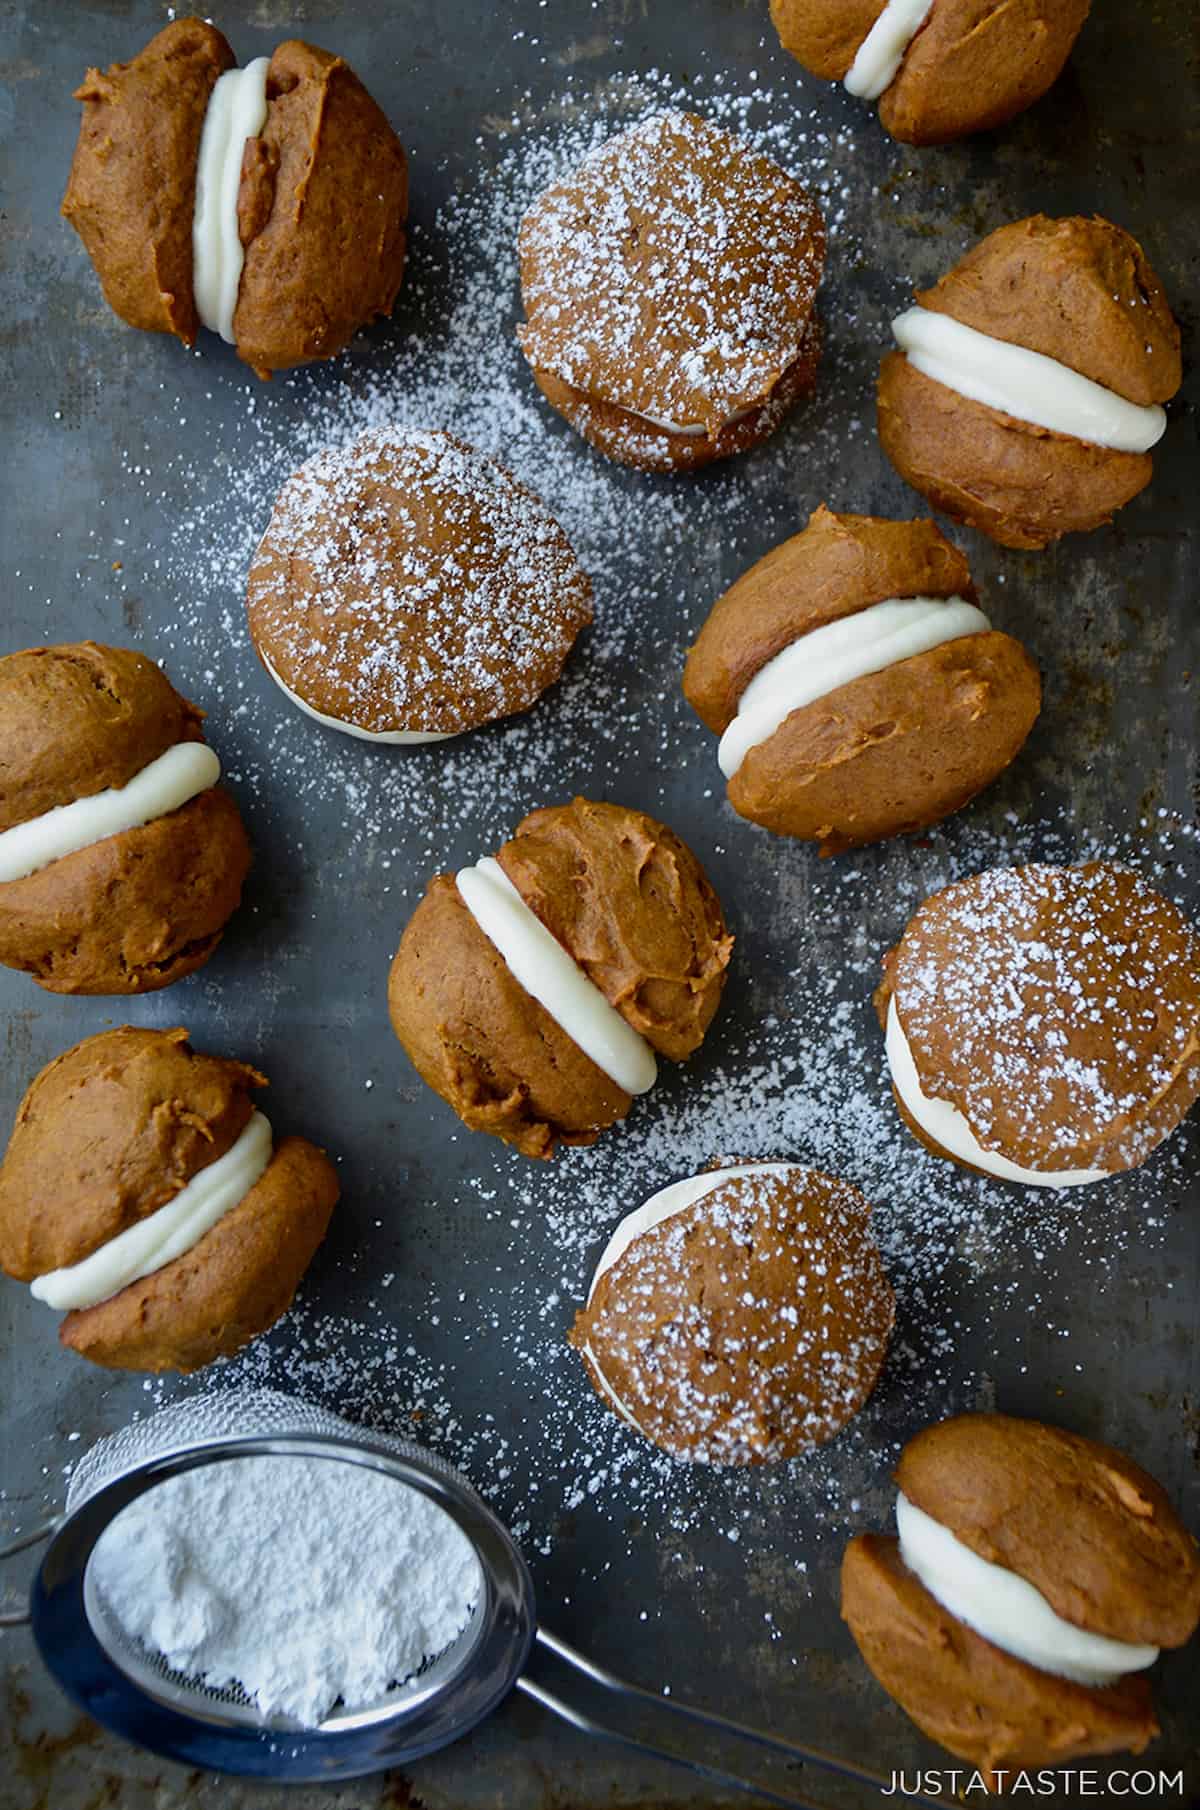 Pumpkin whoopie pies on a baking sheet that are dusted with powdered sugar. A small fine mesh strainer with more powdered sugar sits off to the side.